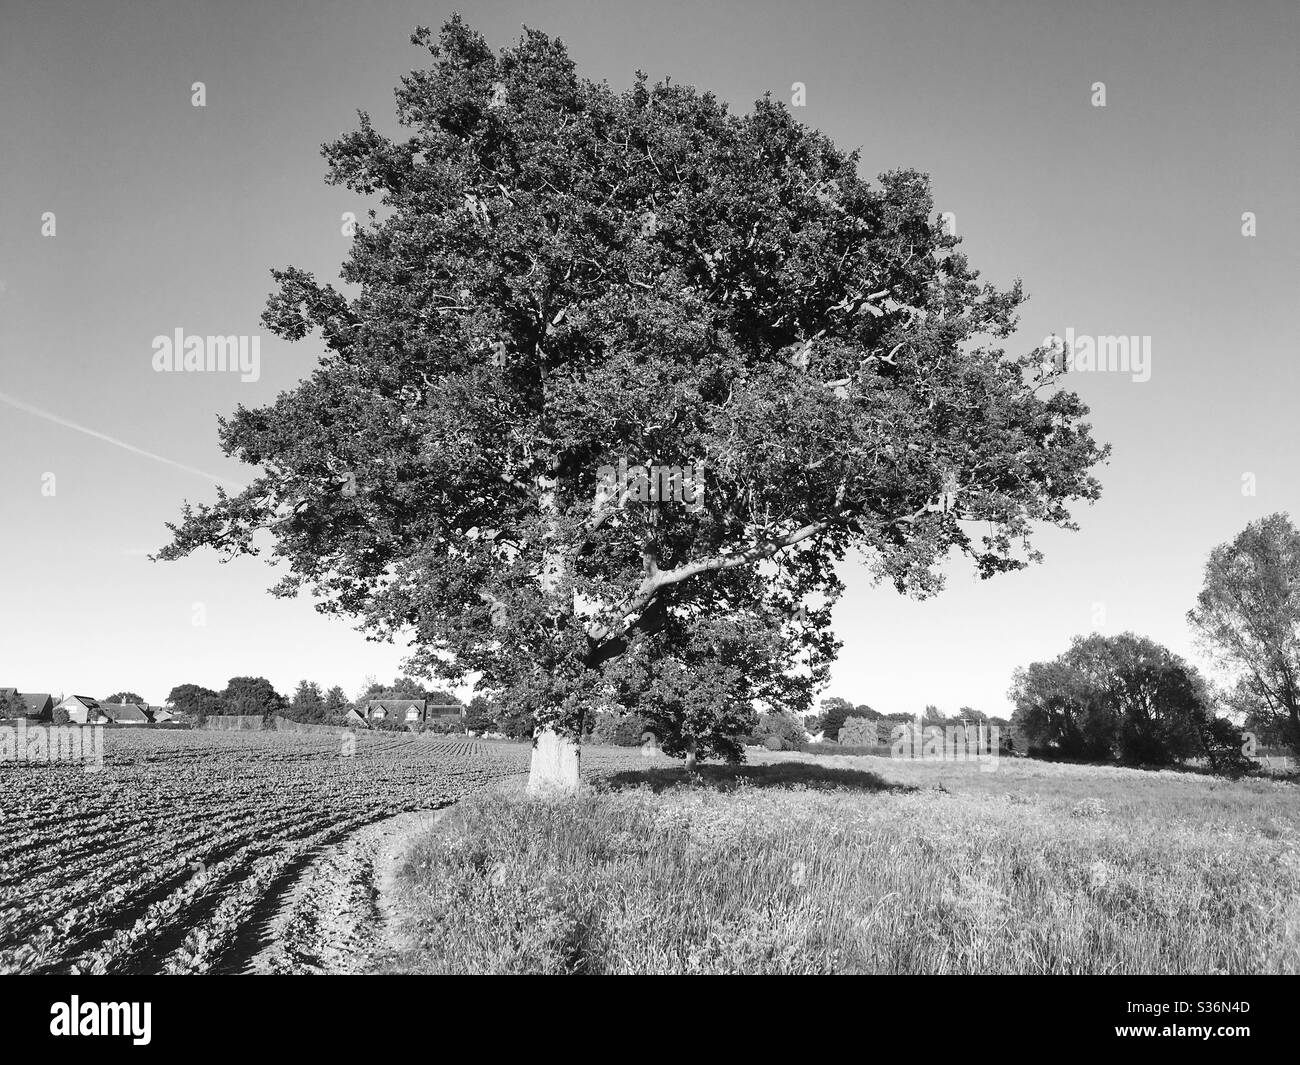 Black and white vintage photo of a beautiful old oak tree in the middle of a field in the countryside Stock Photo